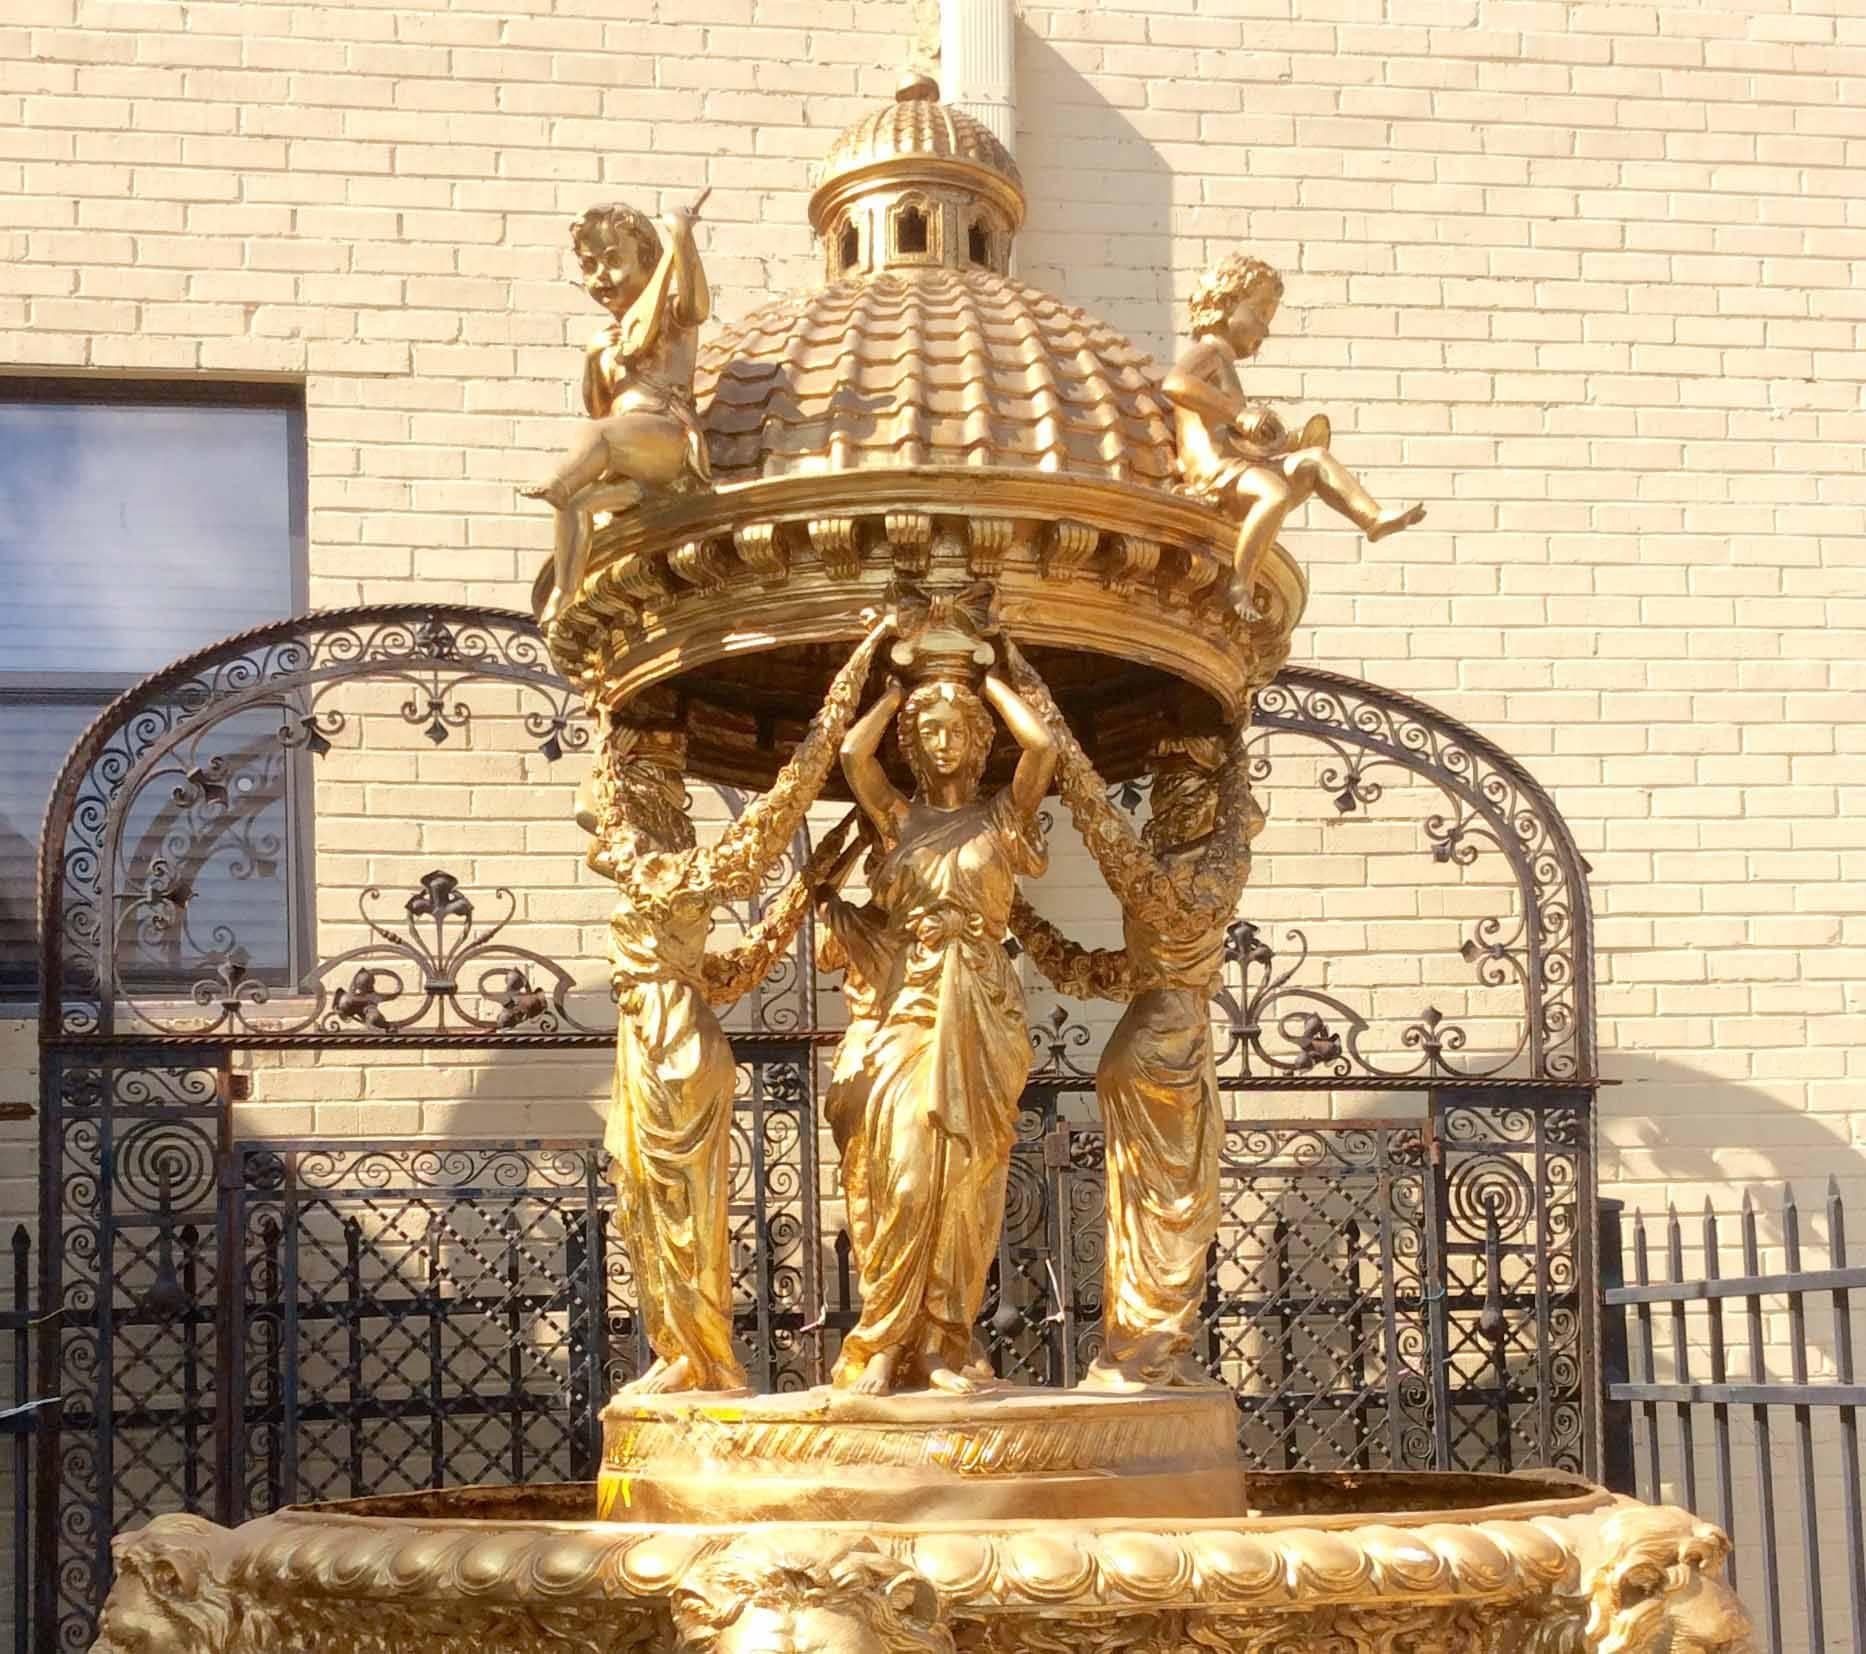 Gilt bronze fountain features lion's heads, women and children playing instruments.

Received from the Win Star Casino, Ada, Oklahoma,

Measurements:
6' D x 11' H.